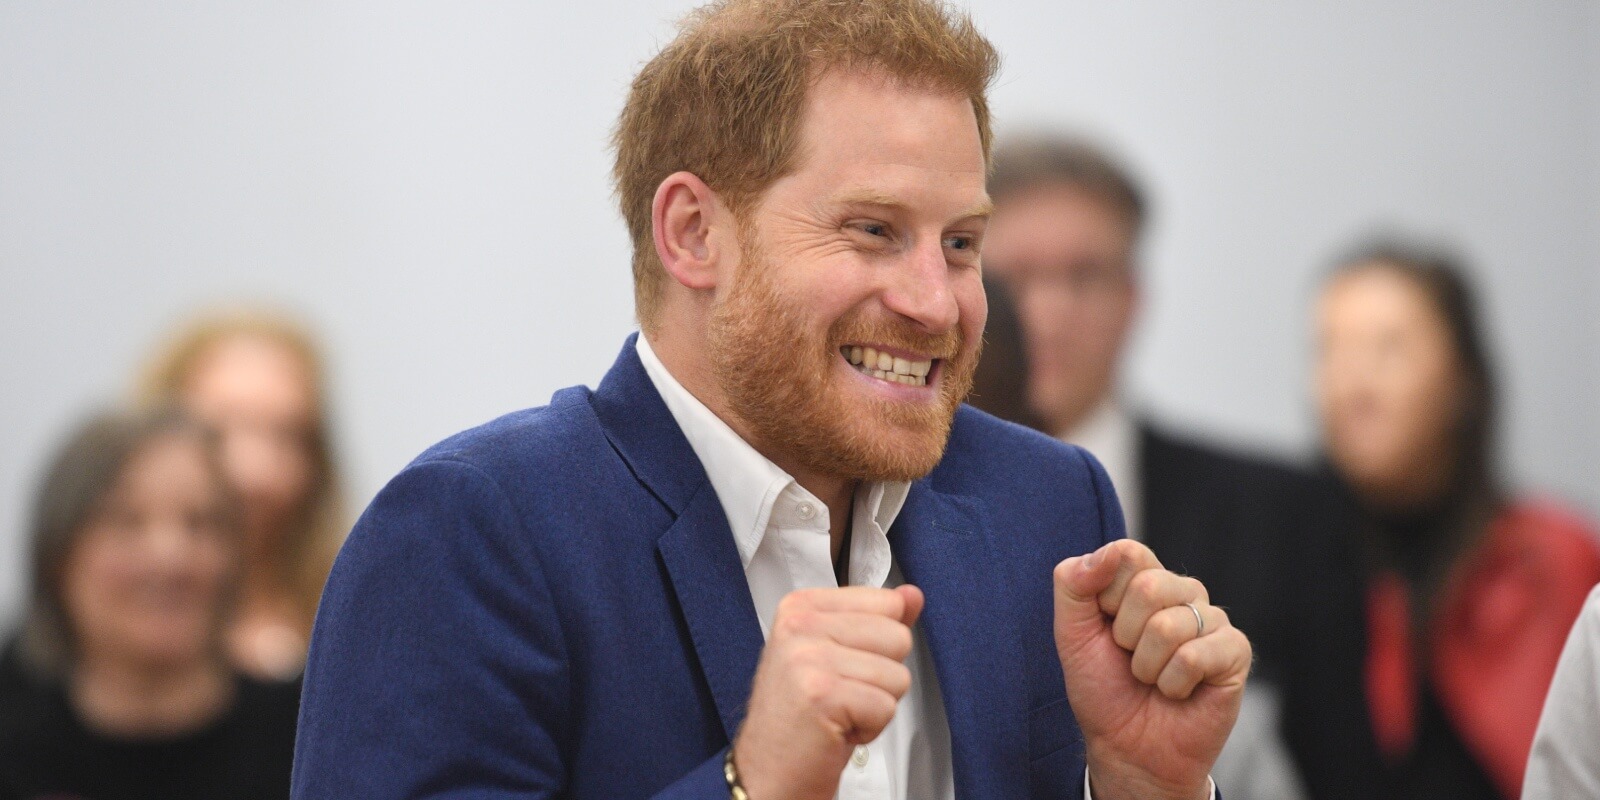 Prince Harry may skip his father's coronation after RSVP says royal expert.